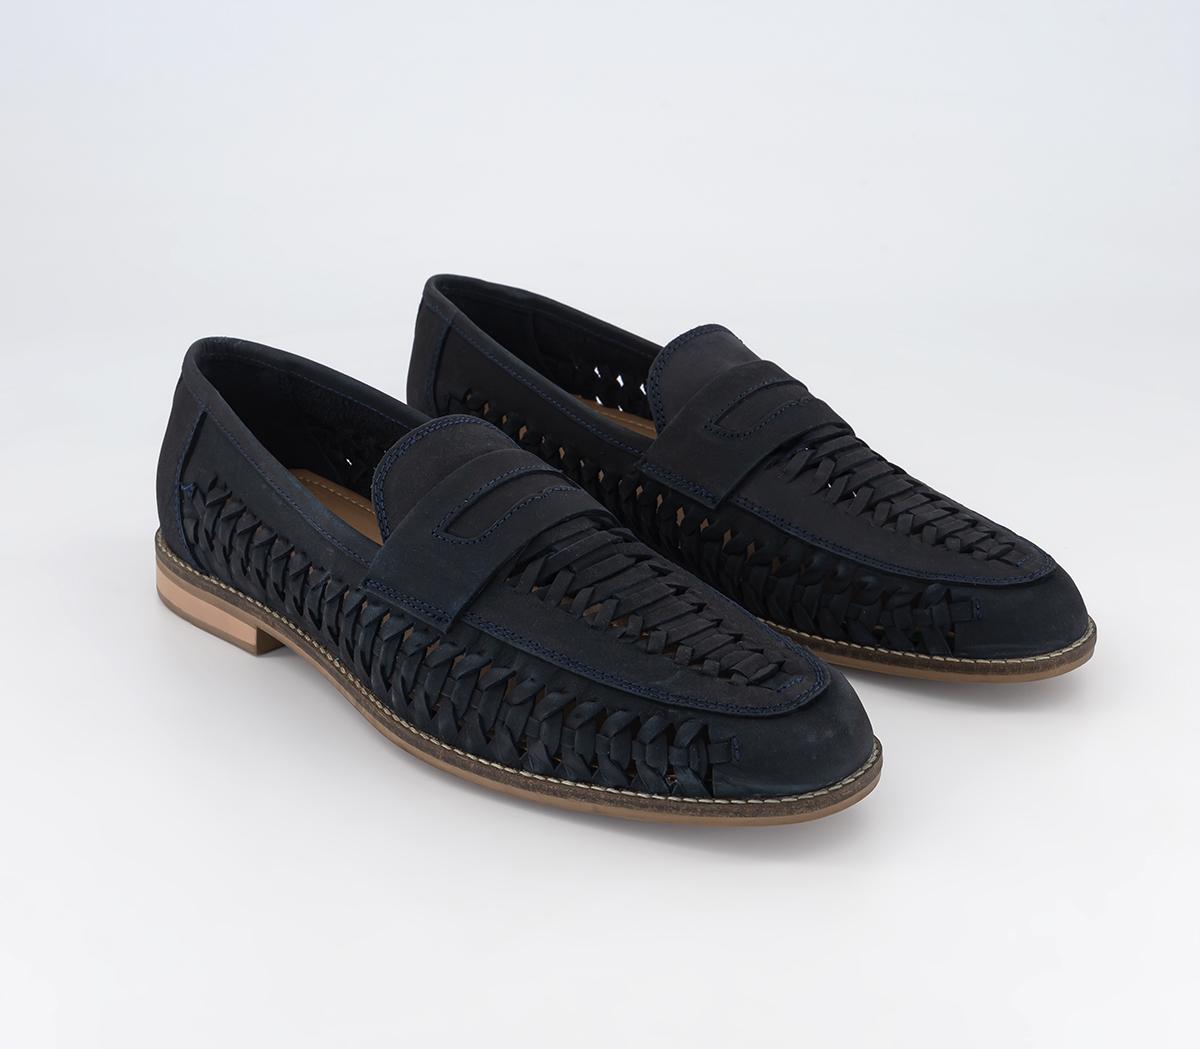 OFFICE Chiswick 2 Woven Saddle Shoes Navy Nubuck - Men's Casual Shoes